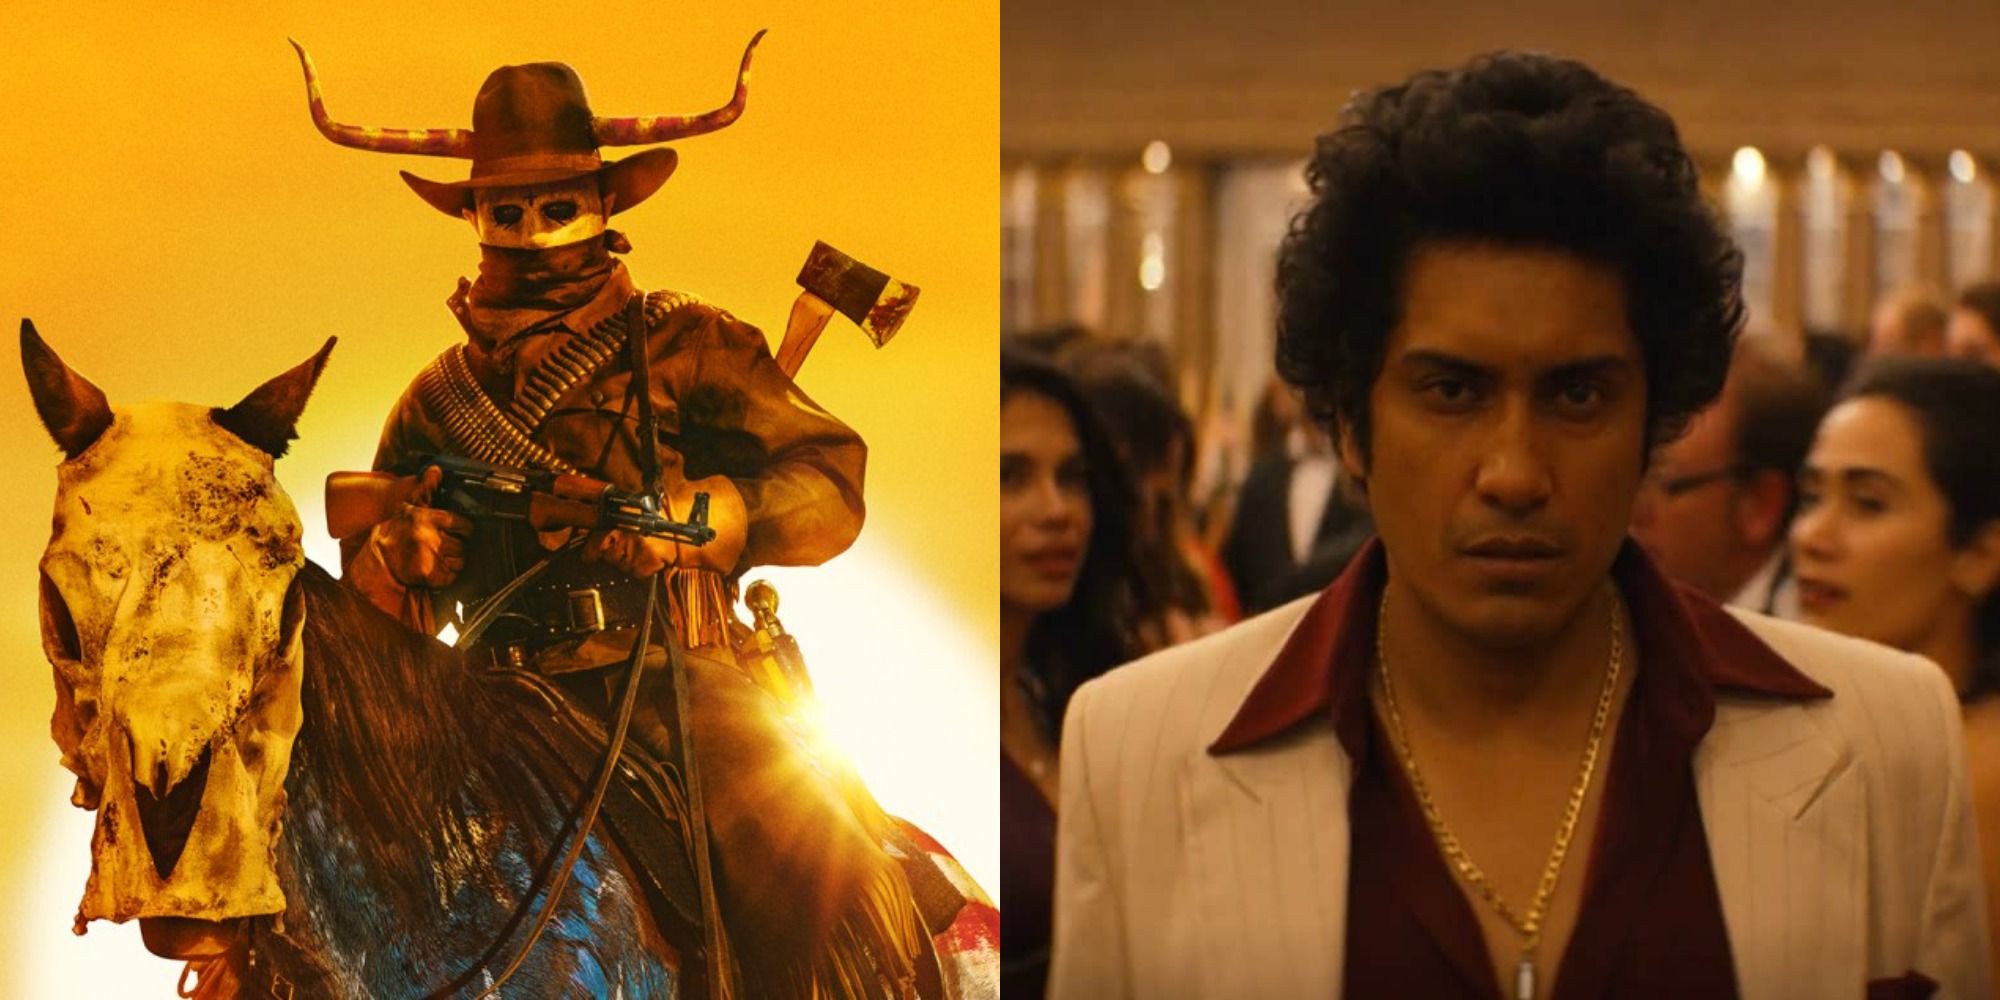 A split image of The Forever Purge movie poster and Tenoch Huerta in Narcos: Mexico